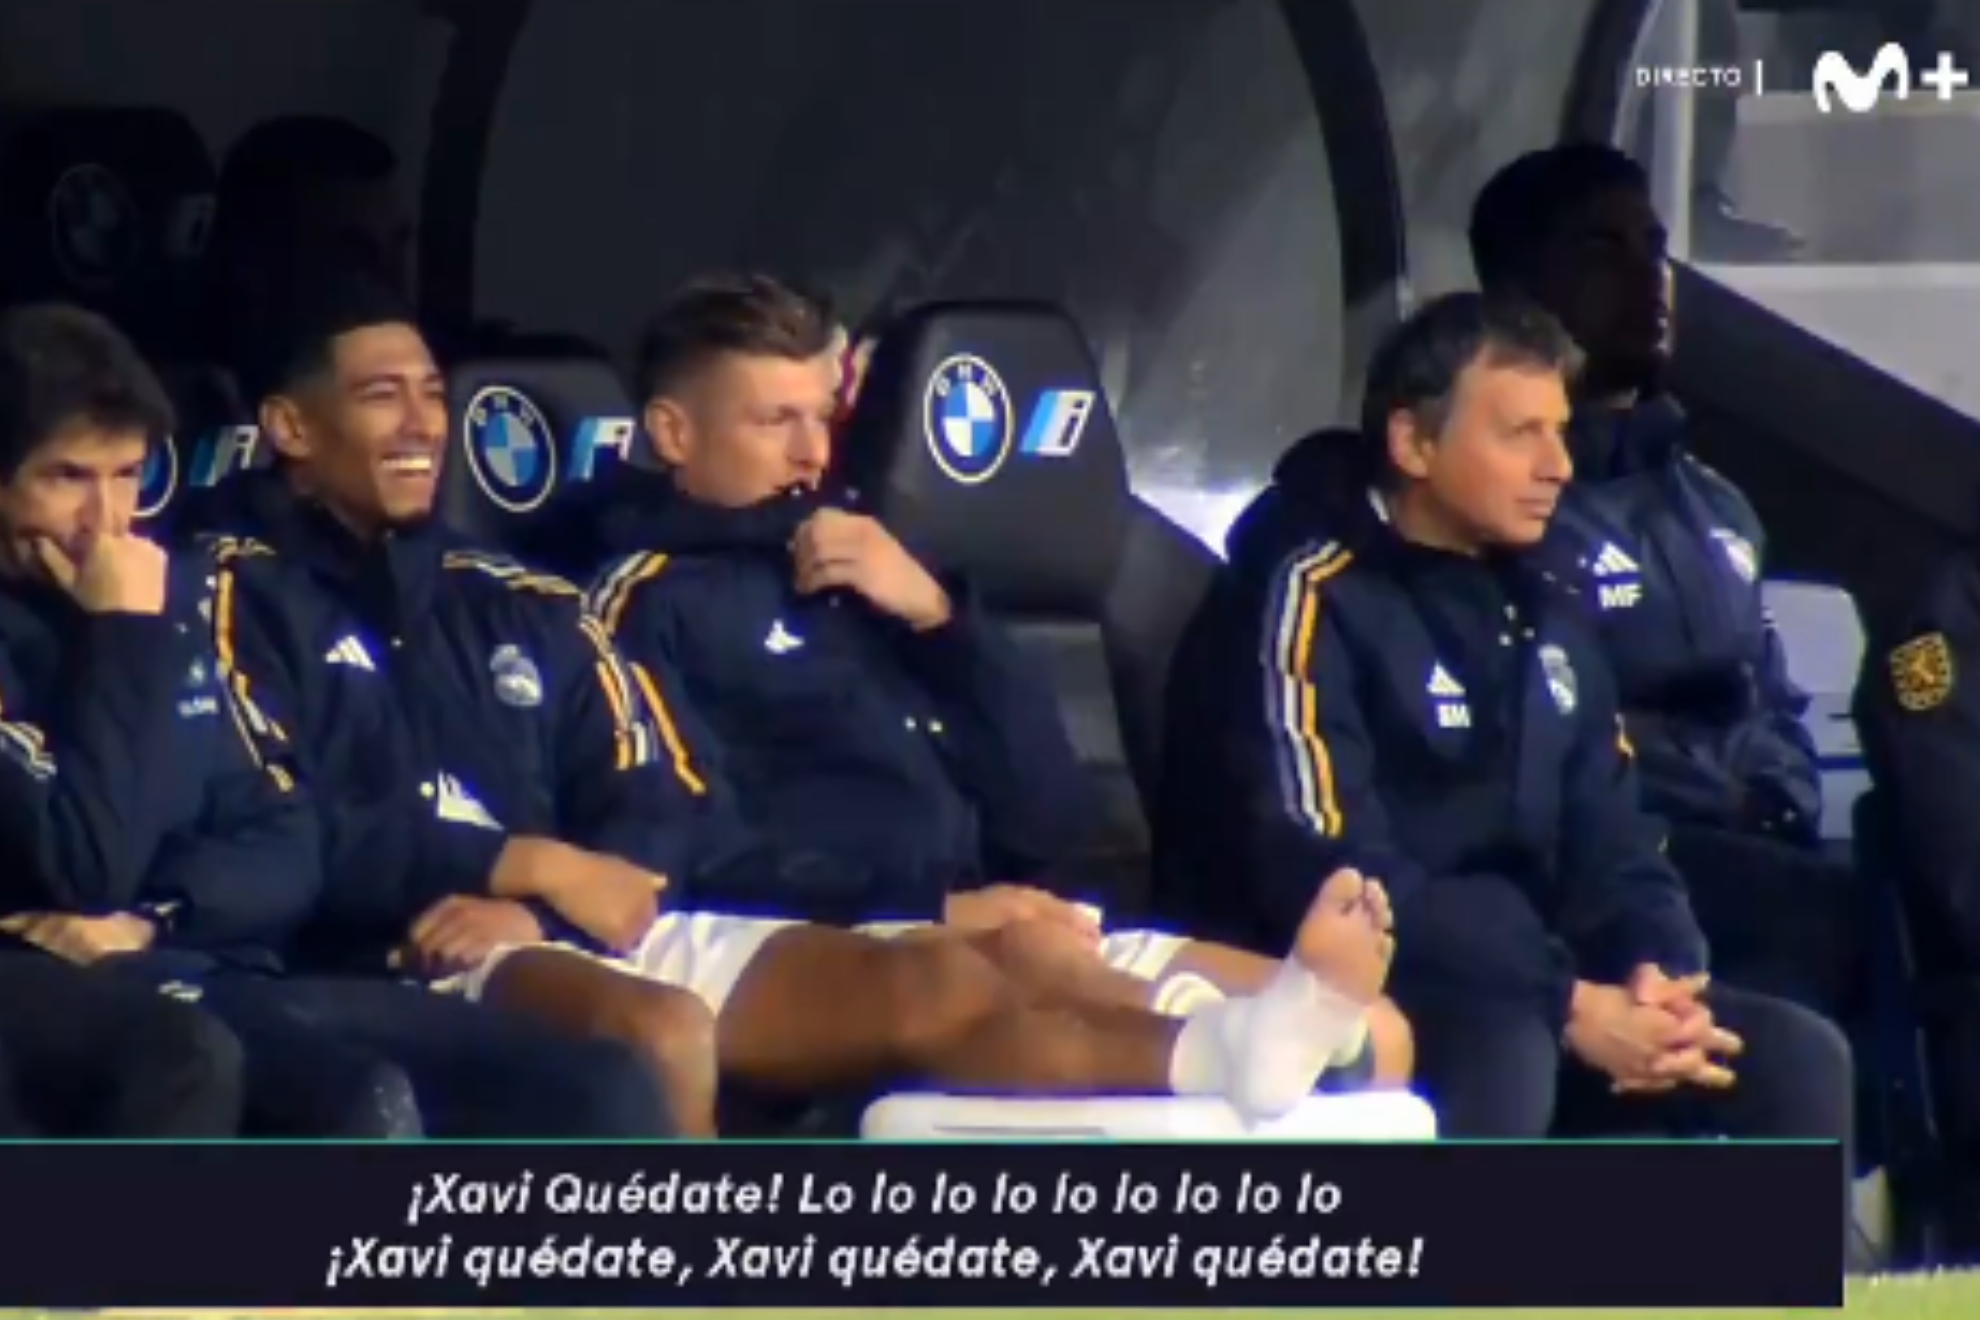 Bellingham and Kroos had a giggle at the chant